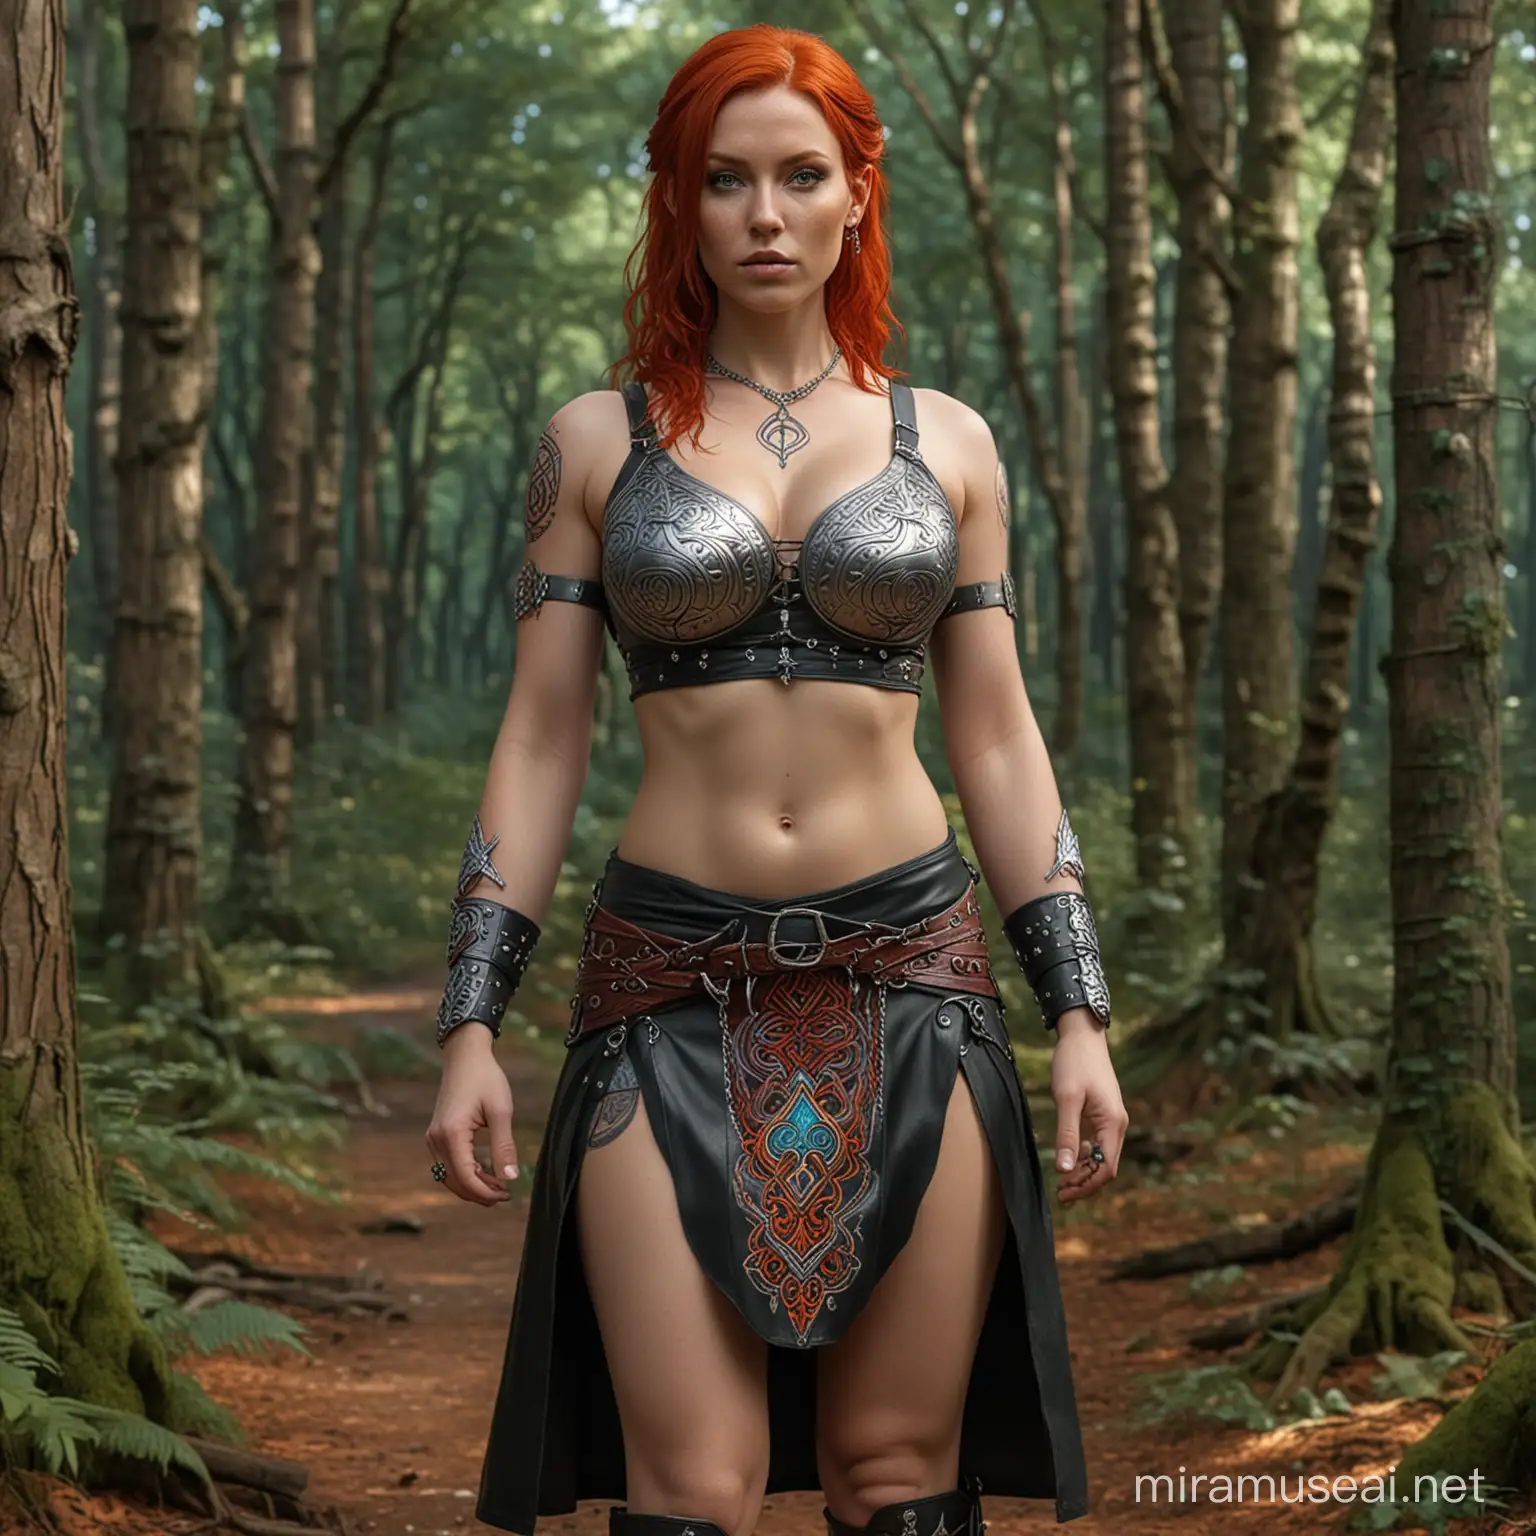 hyperrealistic extreme detail full body long shot showing an anatomically correct female human with large breasts, with fiery red hair decorated with silver, colourful draconic symbols carved into arms and body, wearing a minimal sleeveless open front leather top that is engraved with colourful celtic runes. wearing a short loose skirt engraved with colourful elven symbols. in a forest